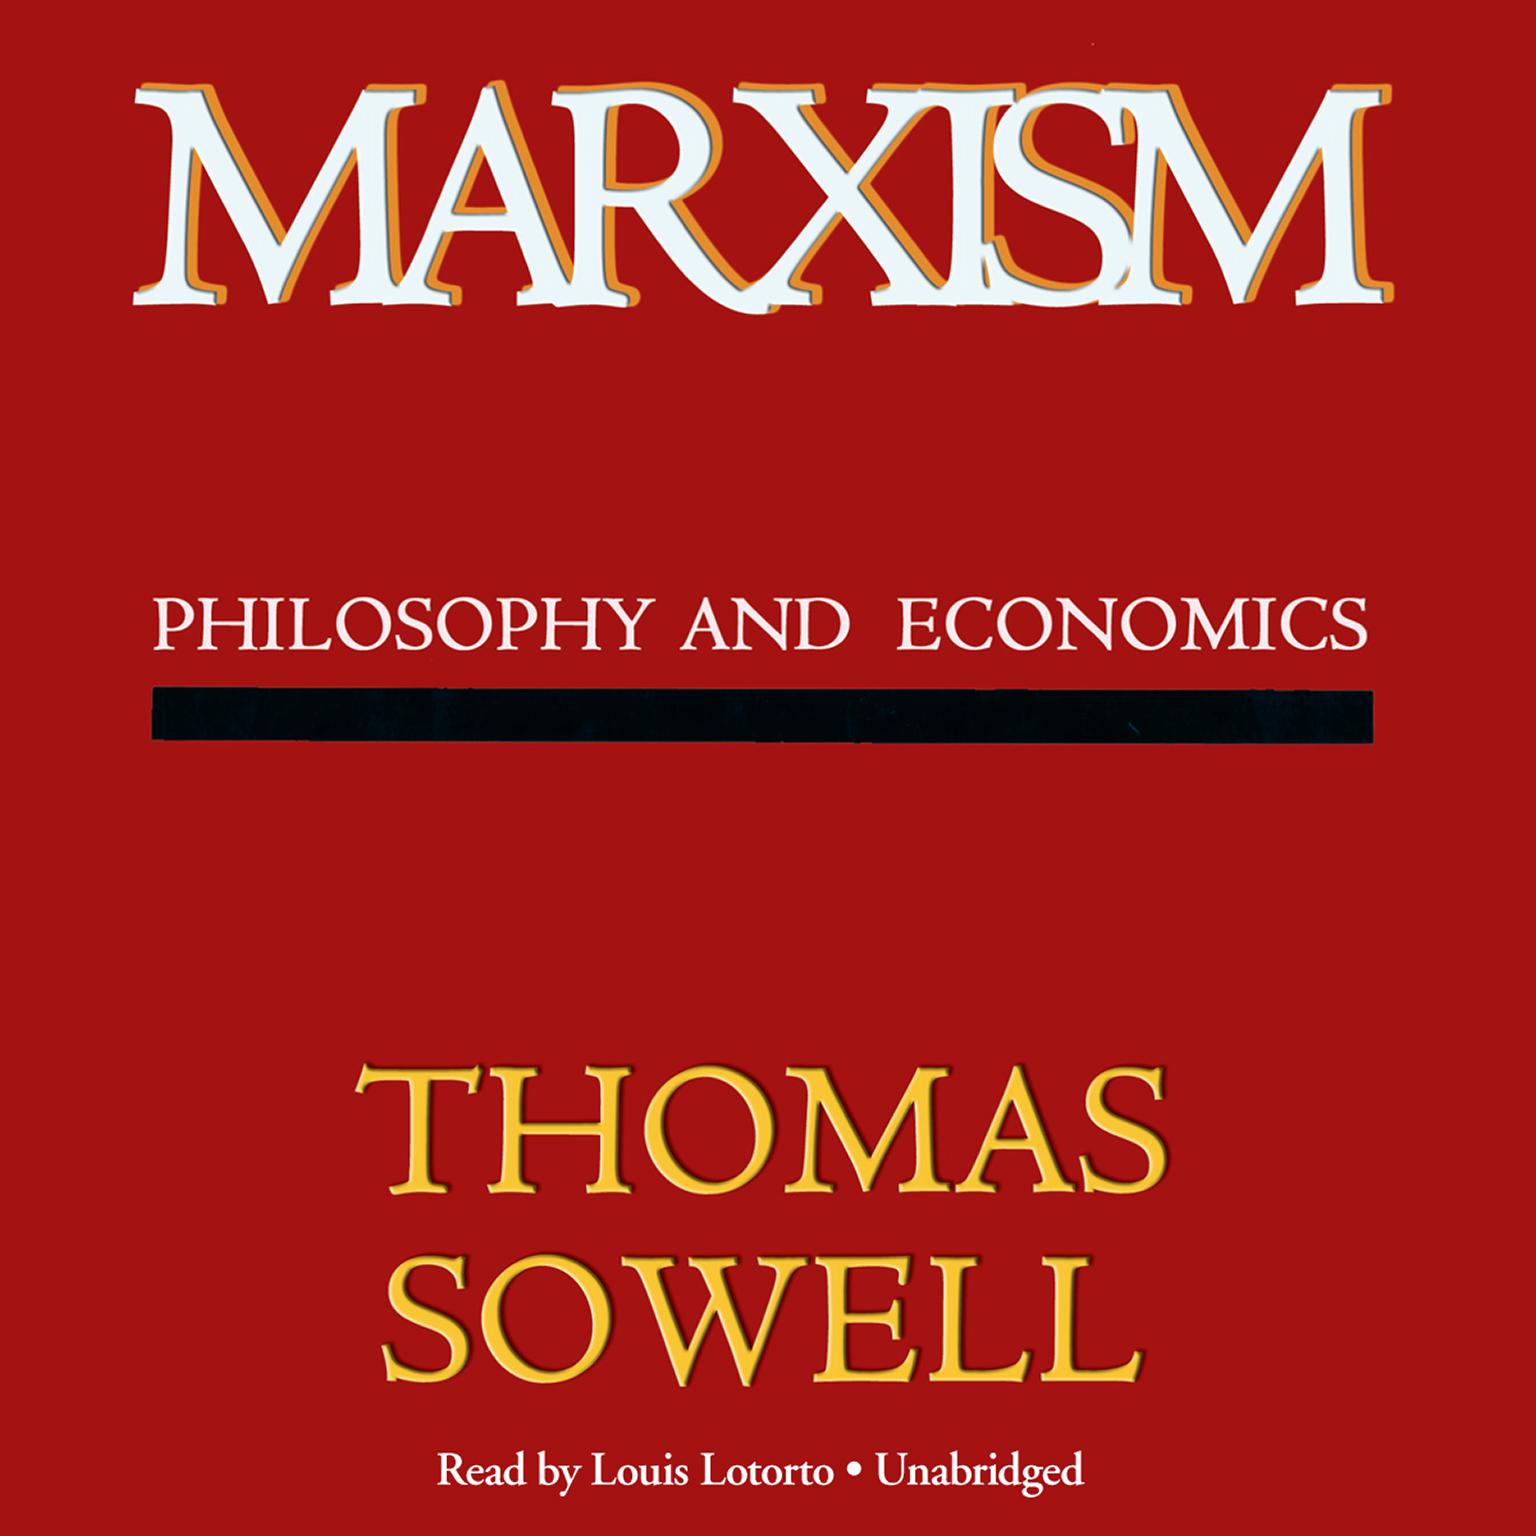 Marxism: Philosophy and Economics Audiobook, by Thomas Sowell